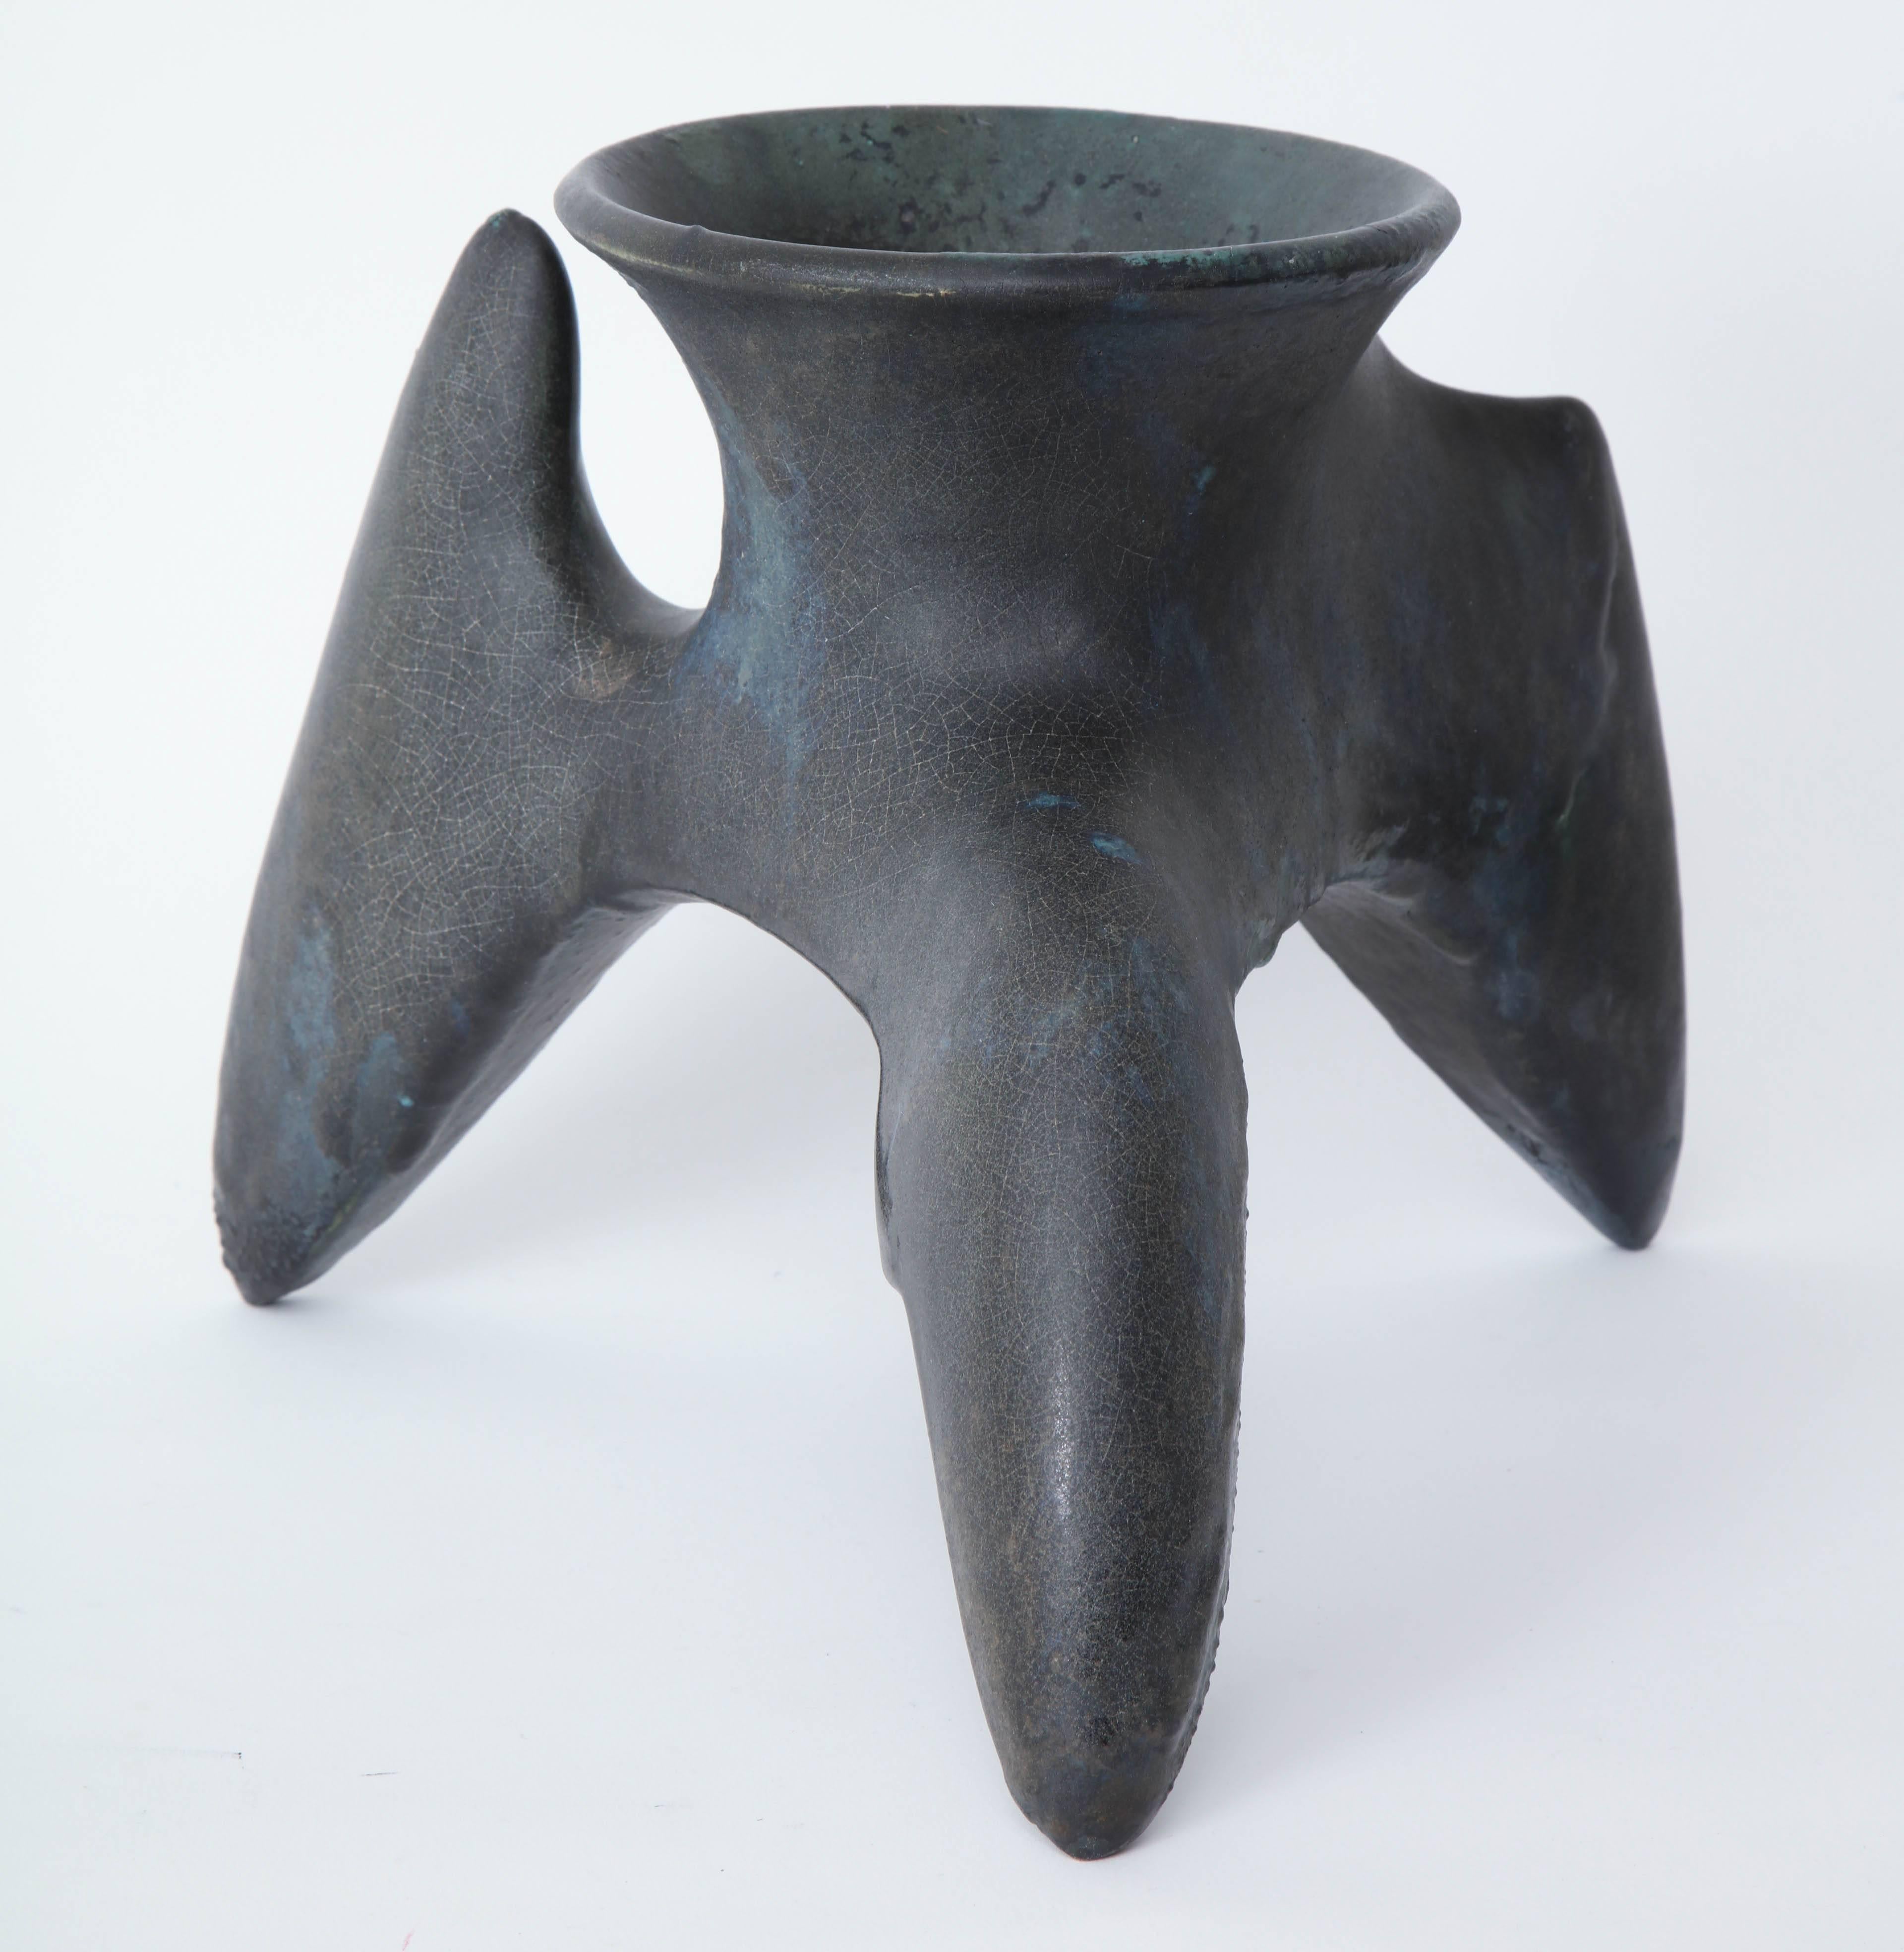 Glazed Richard Hirsch Ceramic Ceremonial Cup #34, Tripod Vessels Collection, 1985 For Sale